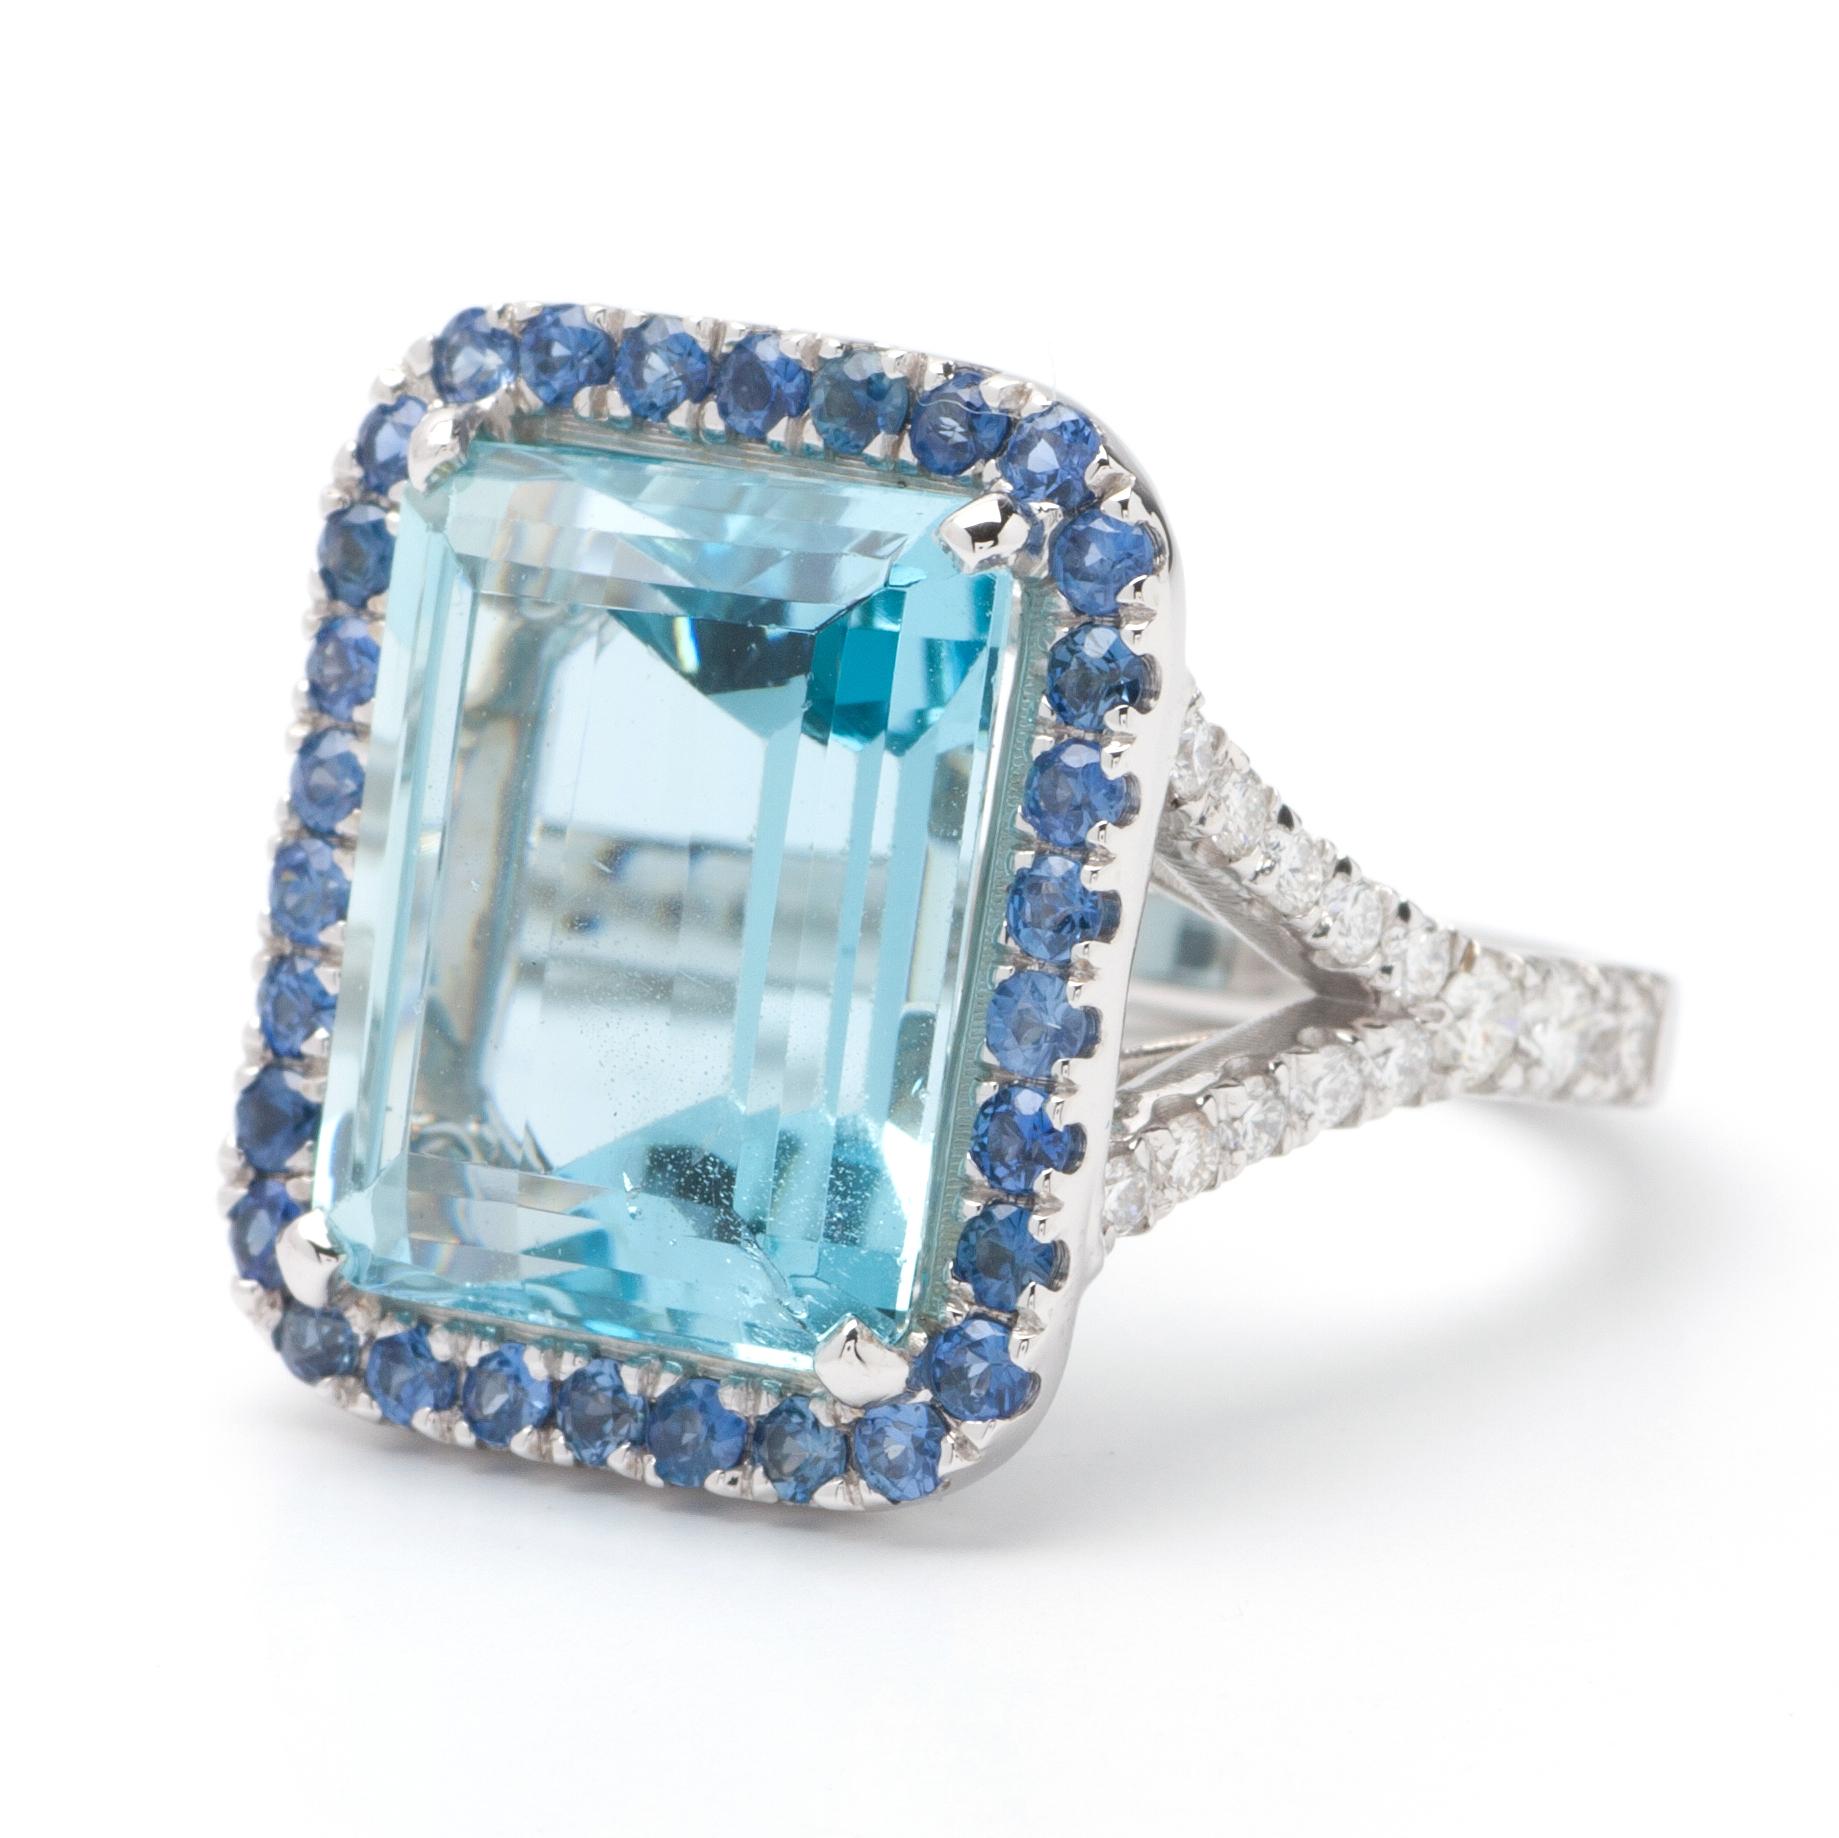 This ring features a halo design with .60ct of sapphires, a split shank of G color, VS1 clarity, and 1.03ct Round side diamonds set in 14K white gold. The center gemstone is an 11.40ct emerald-cut aquamarine stone, measuring 14.95 x 12.02 x 8.63mm.